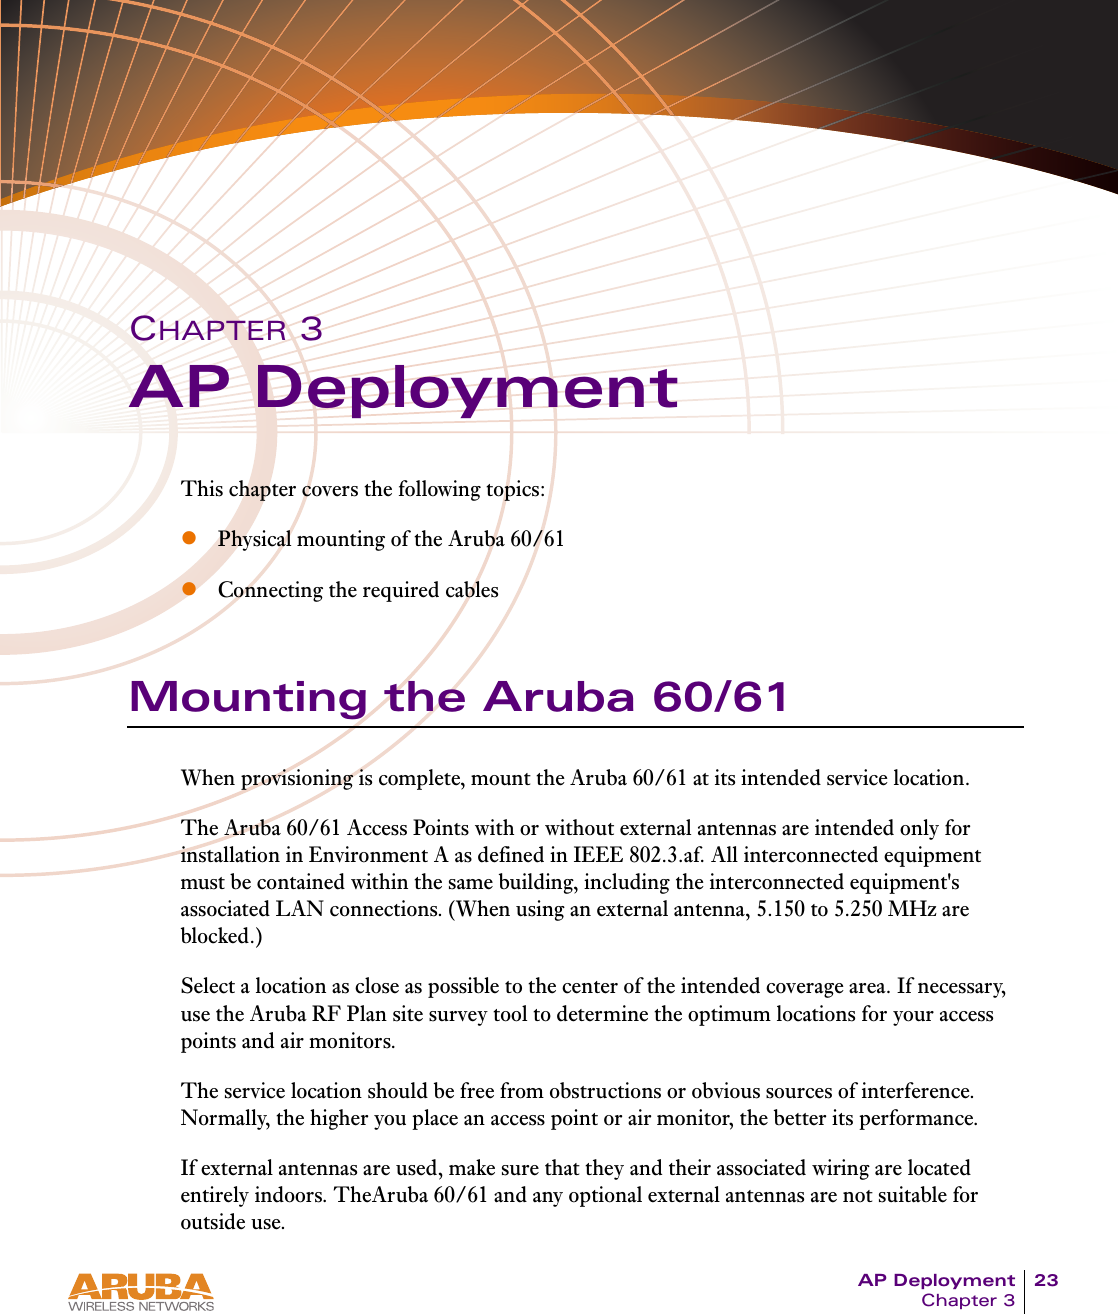 AP Deployment 23Chapter 3CHAPTER 3AP DeploymentThis chapter covers the following topics:zPhysical mounting of the Aruba 60/61zConnecting the required cablesMounting the Aruba 60/61When provisioning is complete, mount the Aruba 60/61 at its intended service location.The Aruba 60/61 Access Points with or without external antennas are intended only for installation in Environment A as defined in IEEE 802.3.af. All interconnected equipment must be contained within the same building, including the interconnected equipment&apos;s associated LAN connections. (When using an external antenna, 5.150 to 5.250 MHz are blocked.)Select a location as close as possible to the center of the intended coverage area. If necessary, use the Aruba RF Plan site survey tool to determine the optimum locations for your access points and air monitors.The service location should be free from obstructions or obvious sources of interference. Normally, the higher you place an access point or air monitor, the better its performance.If external antennas are used, make sure that they and their associated wiring are located entirely indoors. TheAruba 60/61 and any optional external antennas are not suitable for outside use.